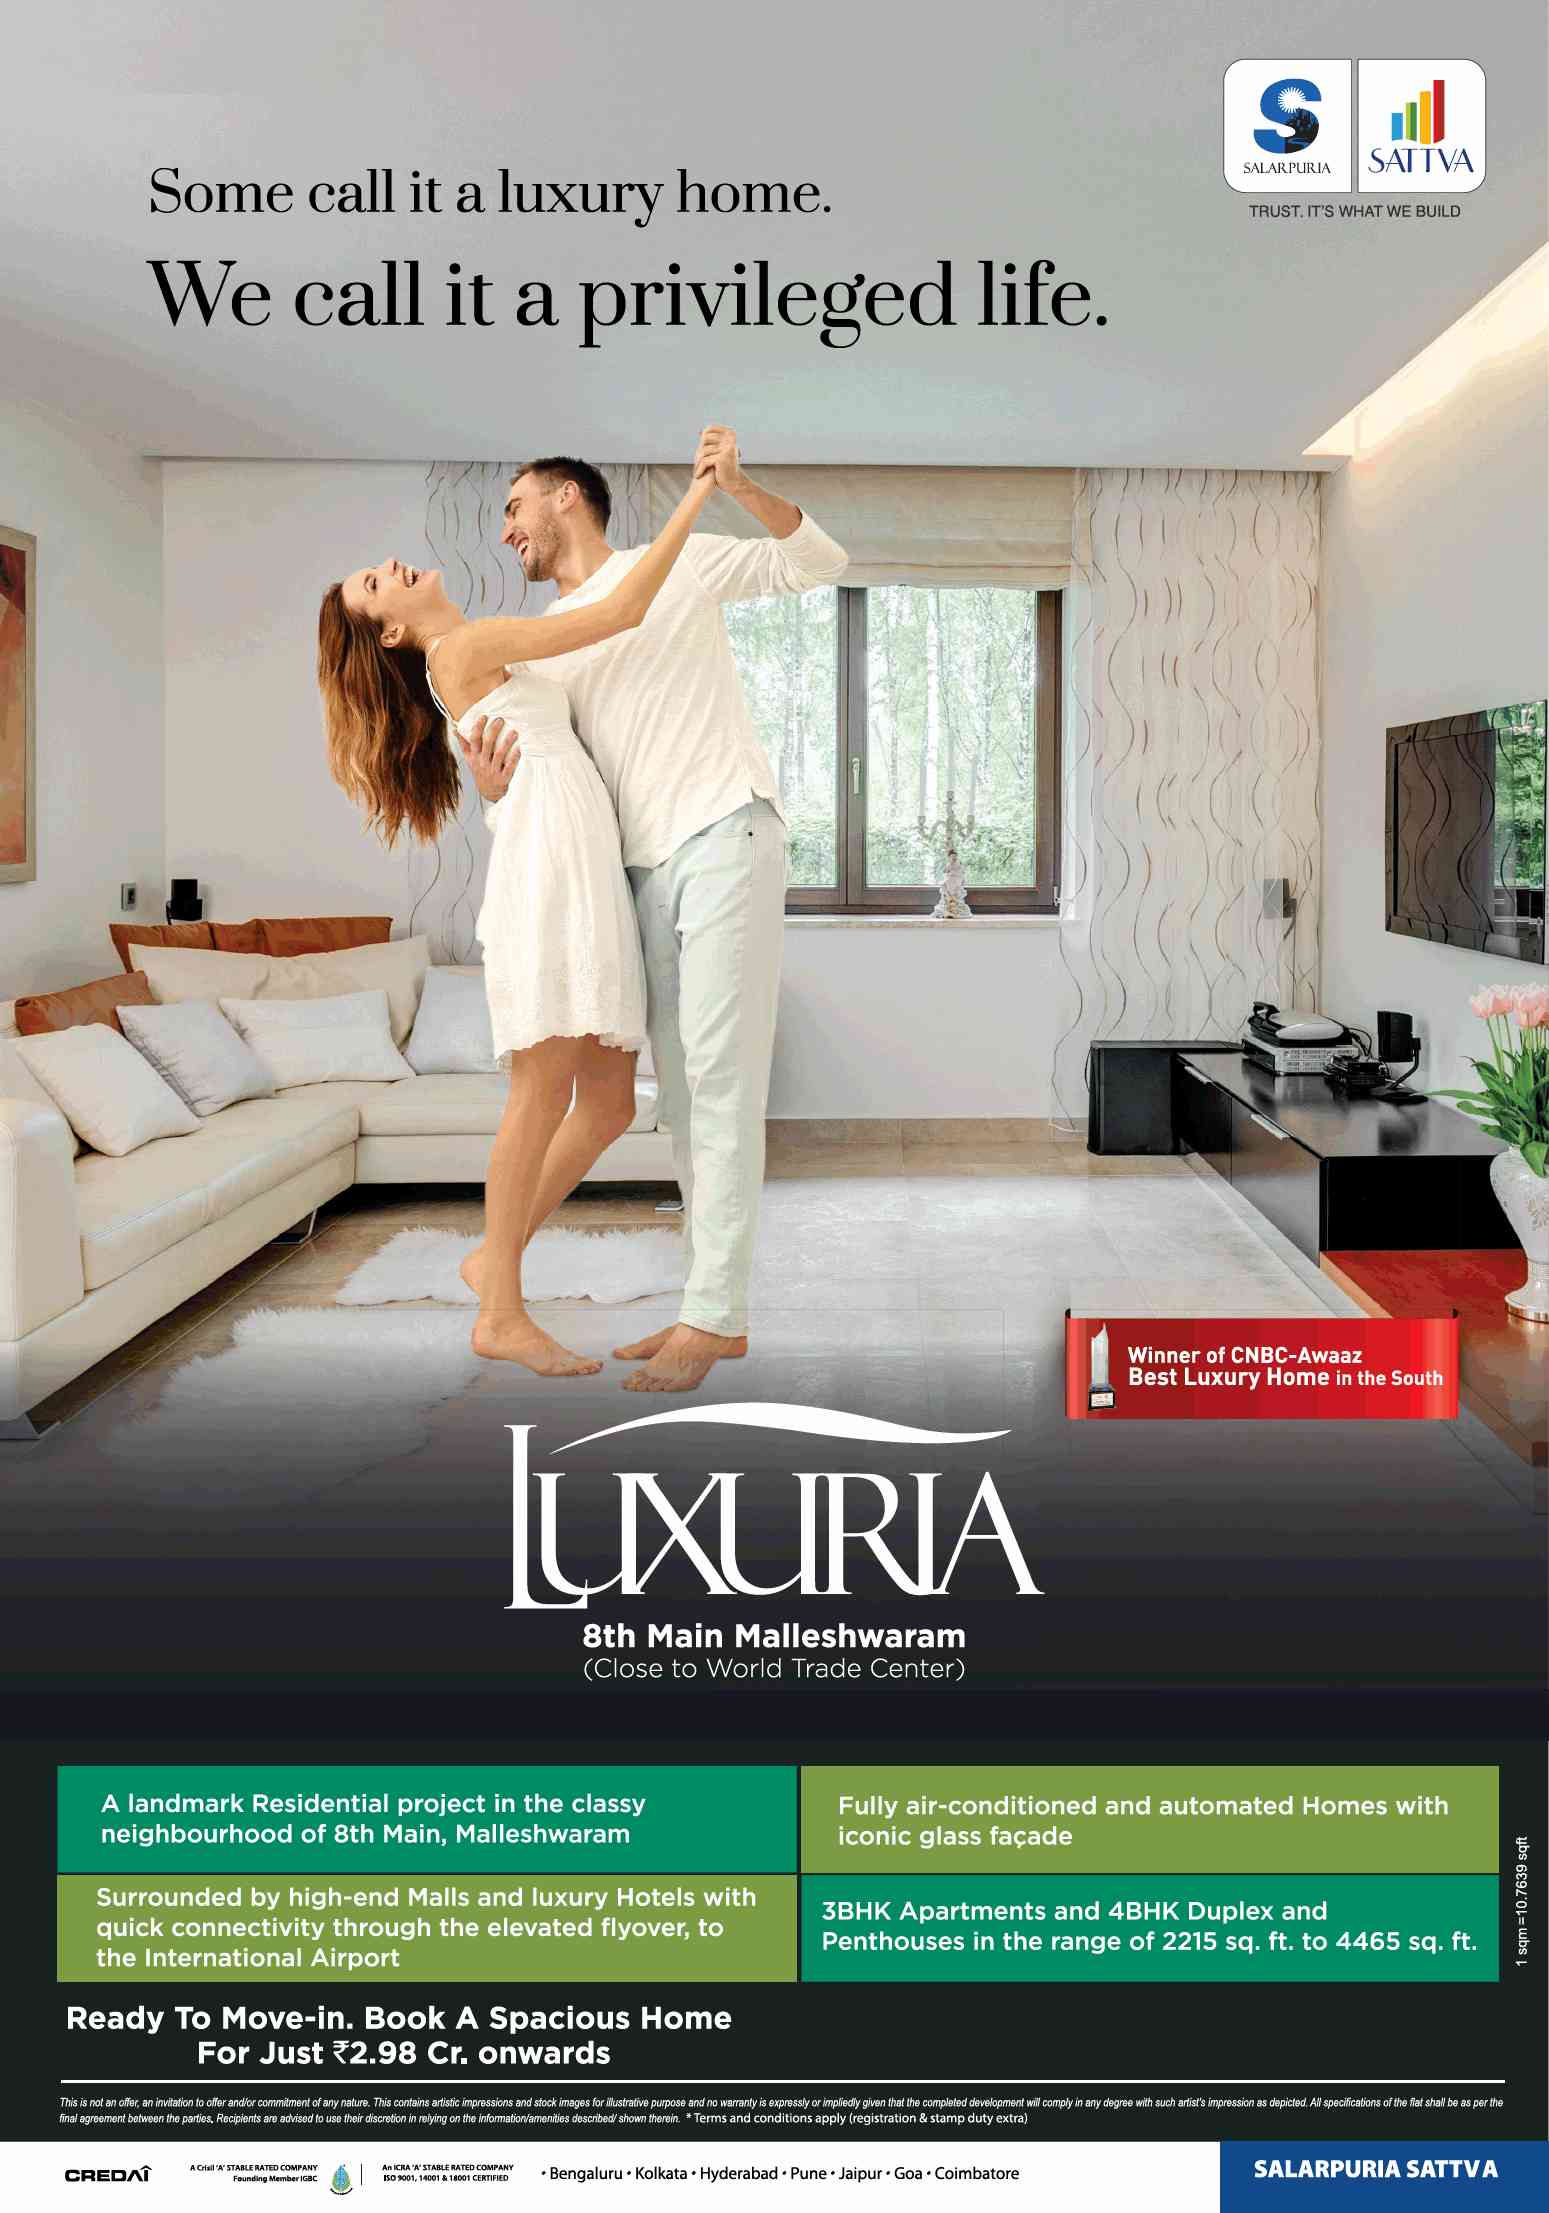 Book ready to move homes at Rs 2.98 cr at Salarpuria Sattva Luxuria in Bangalore Update